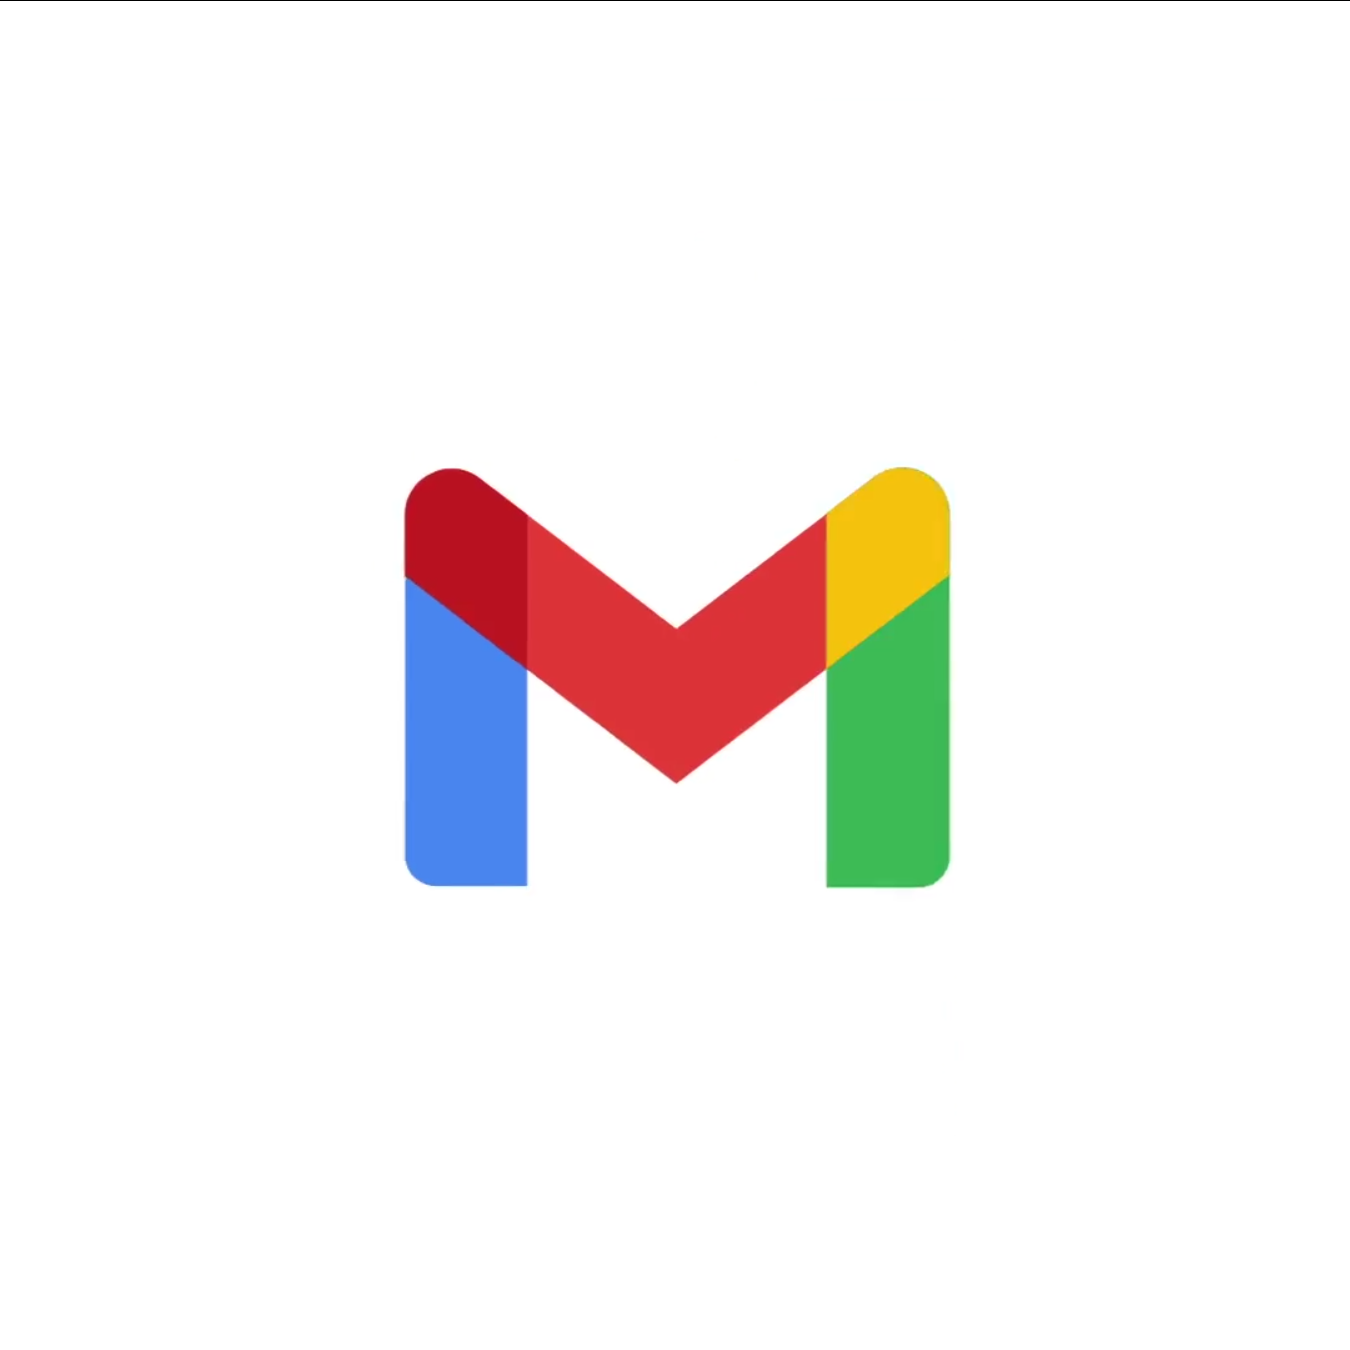 Gmail is launched